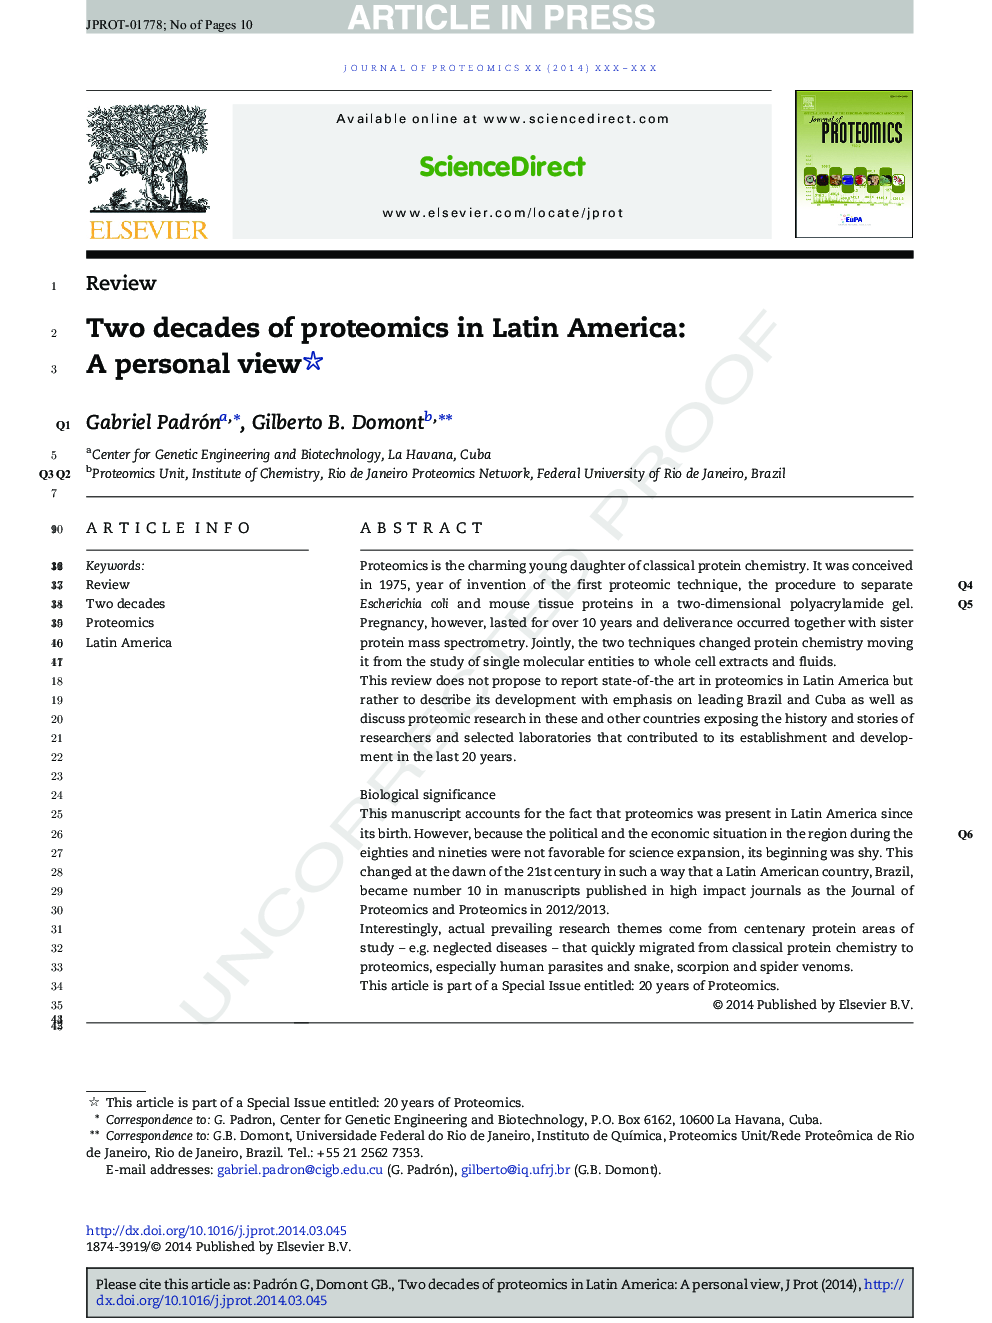 Two decades of proteomics in Latin America: A personal view